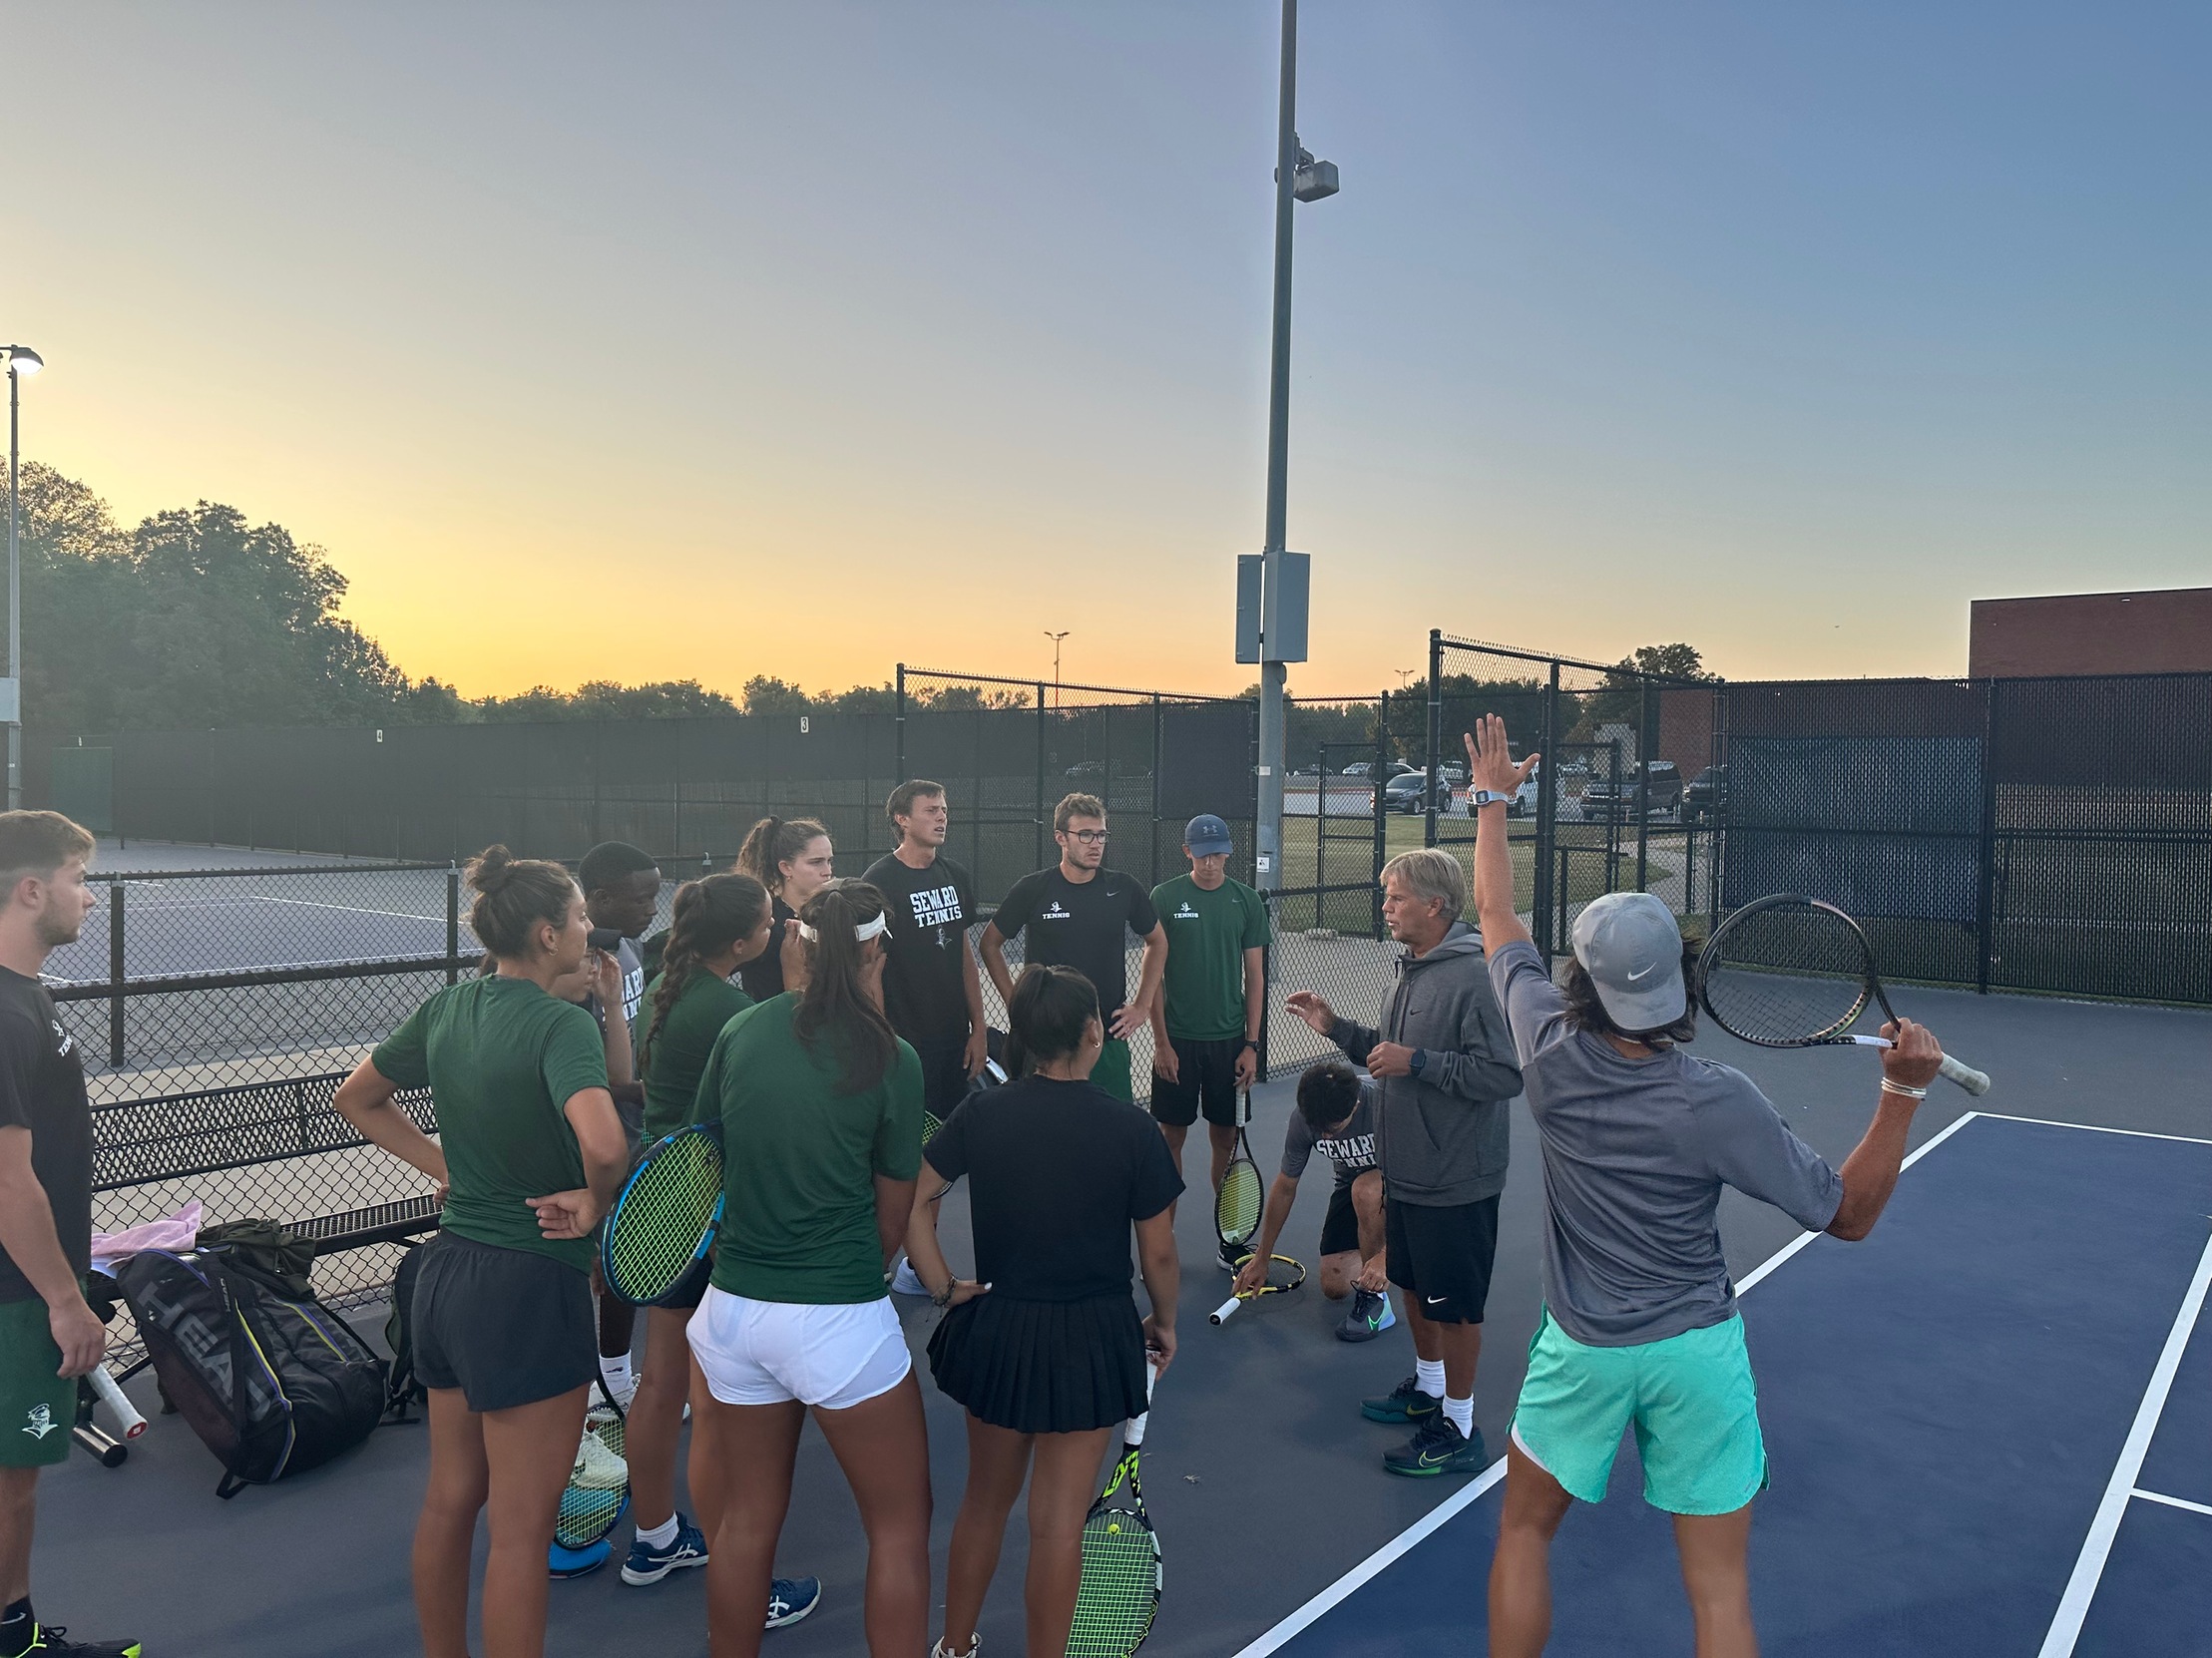 Day One of ITA Regionals, Saints look to continue early season growth